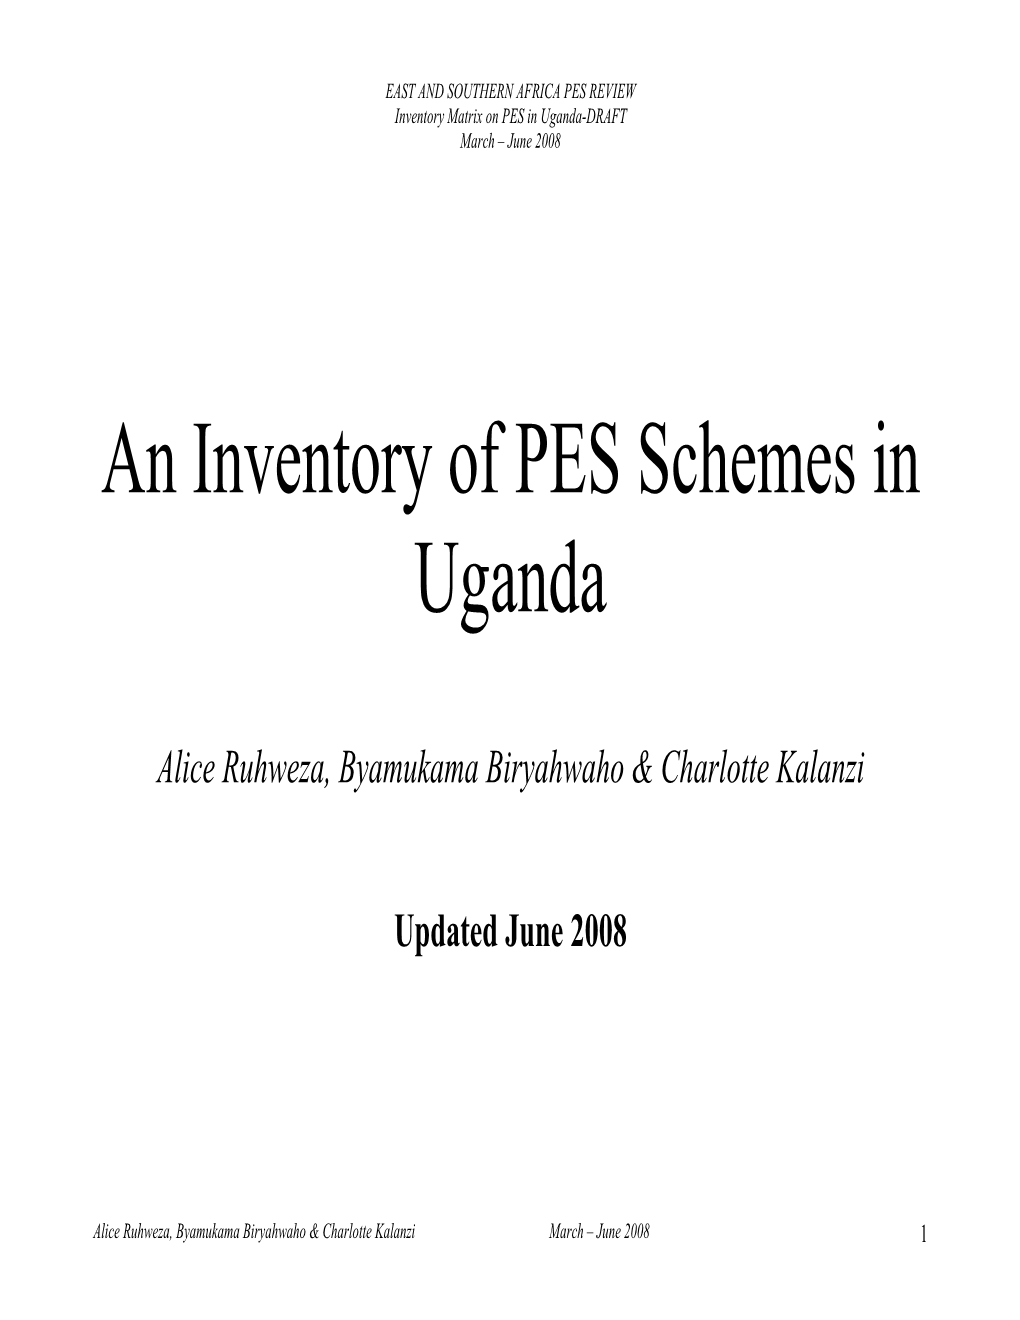 An Inventory of PES Schemes in Uganda